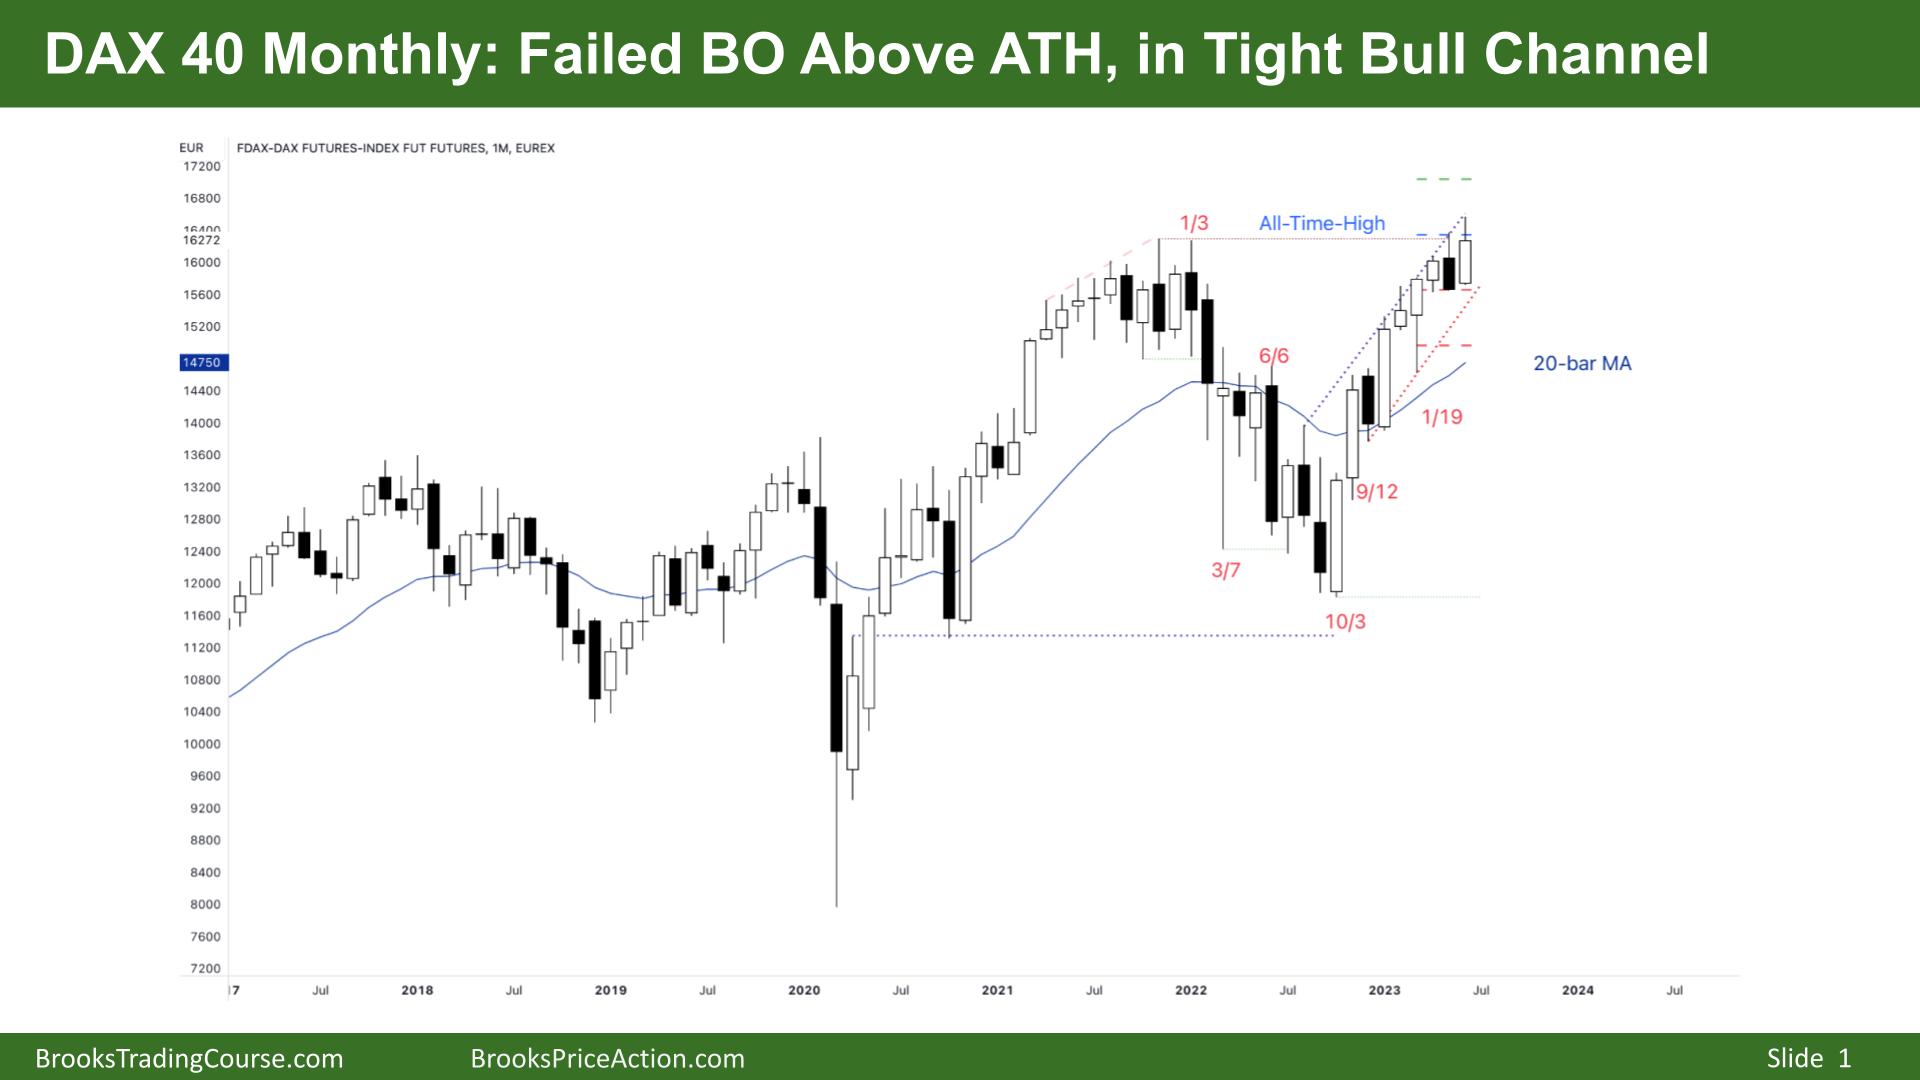 DAX 40 Failed BO Above ATH in Tight Bull Channel